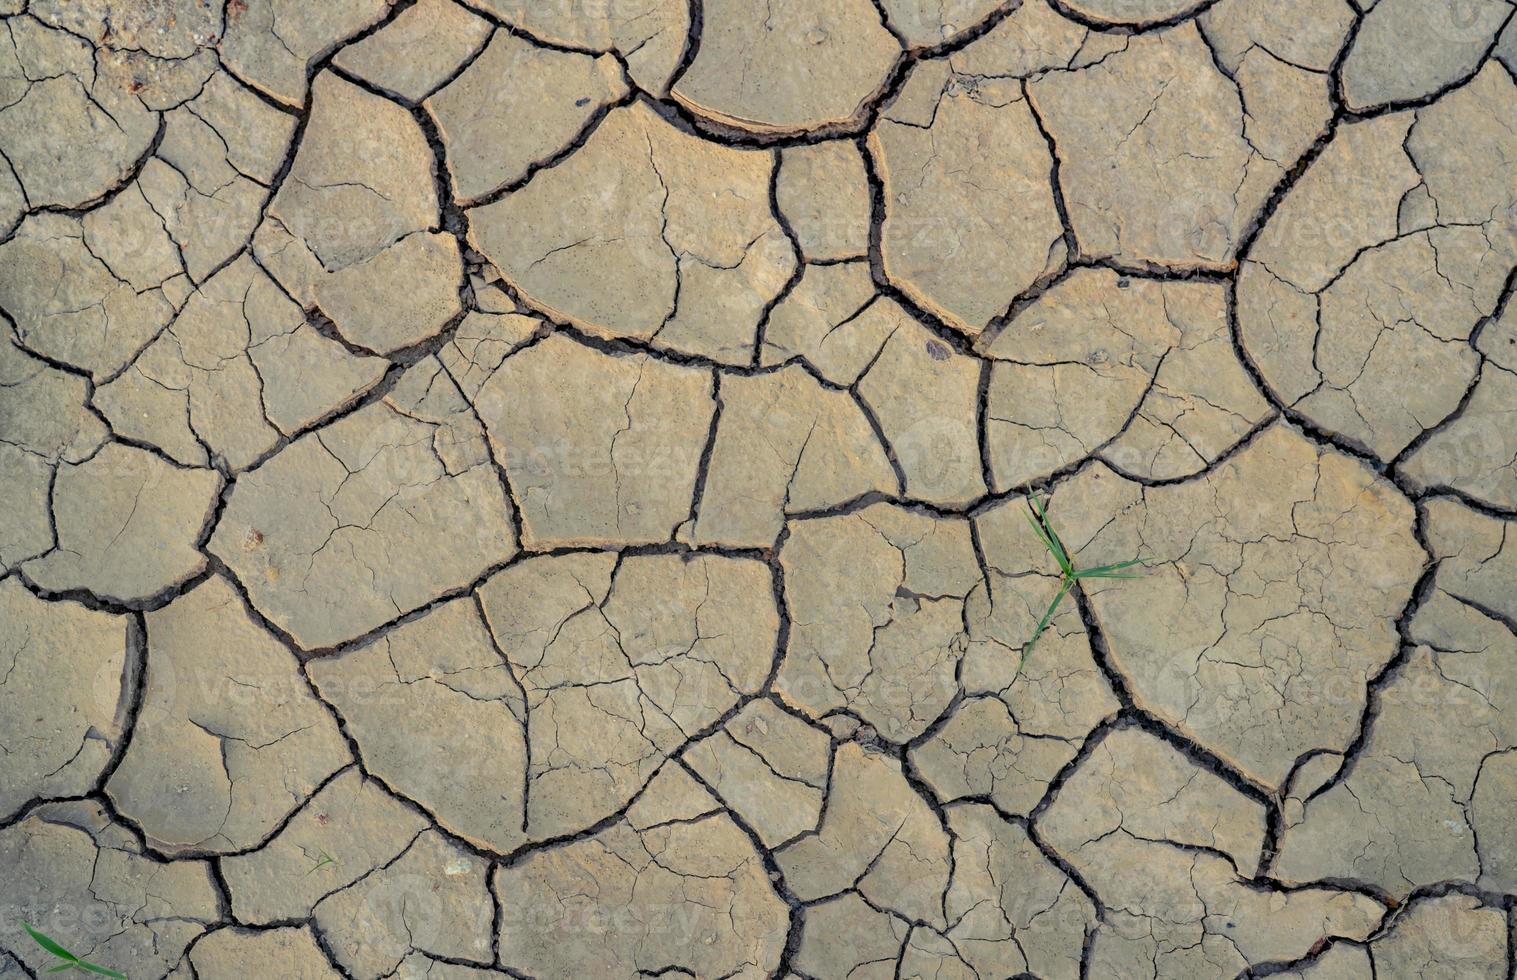 Climate change and drought land. Water crisis. Arid climate. Crack soil. Global warming. Environment problem. Nature disaster. Dry soil texture background. Dry and cracked skin need moisture concept. photo